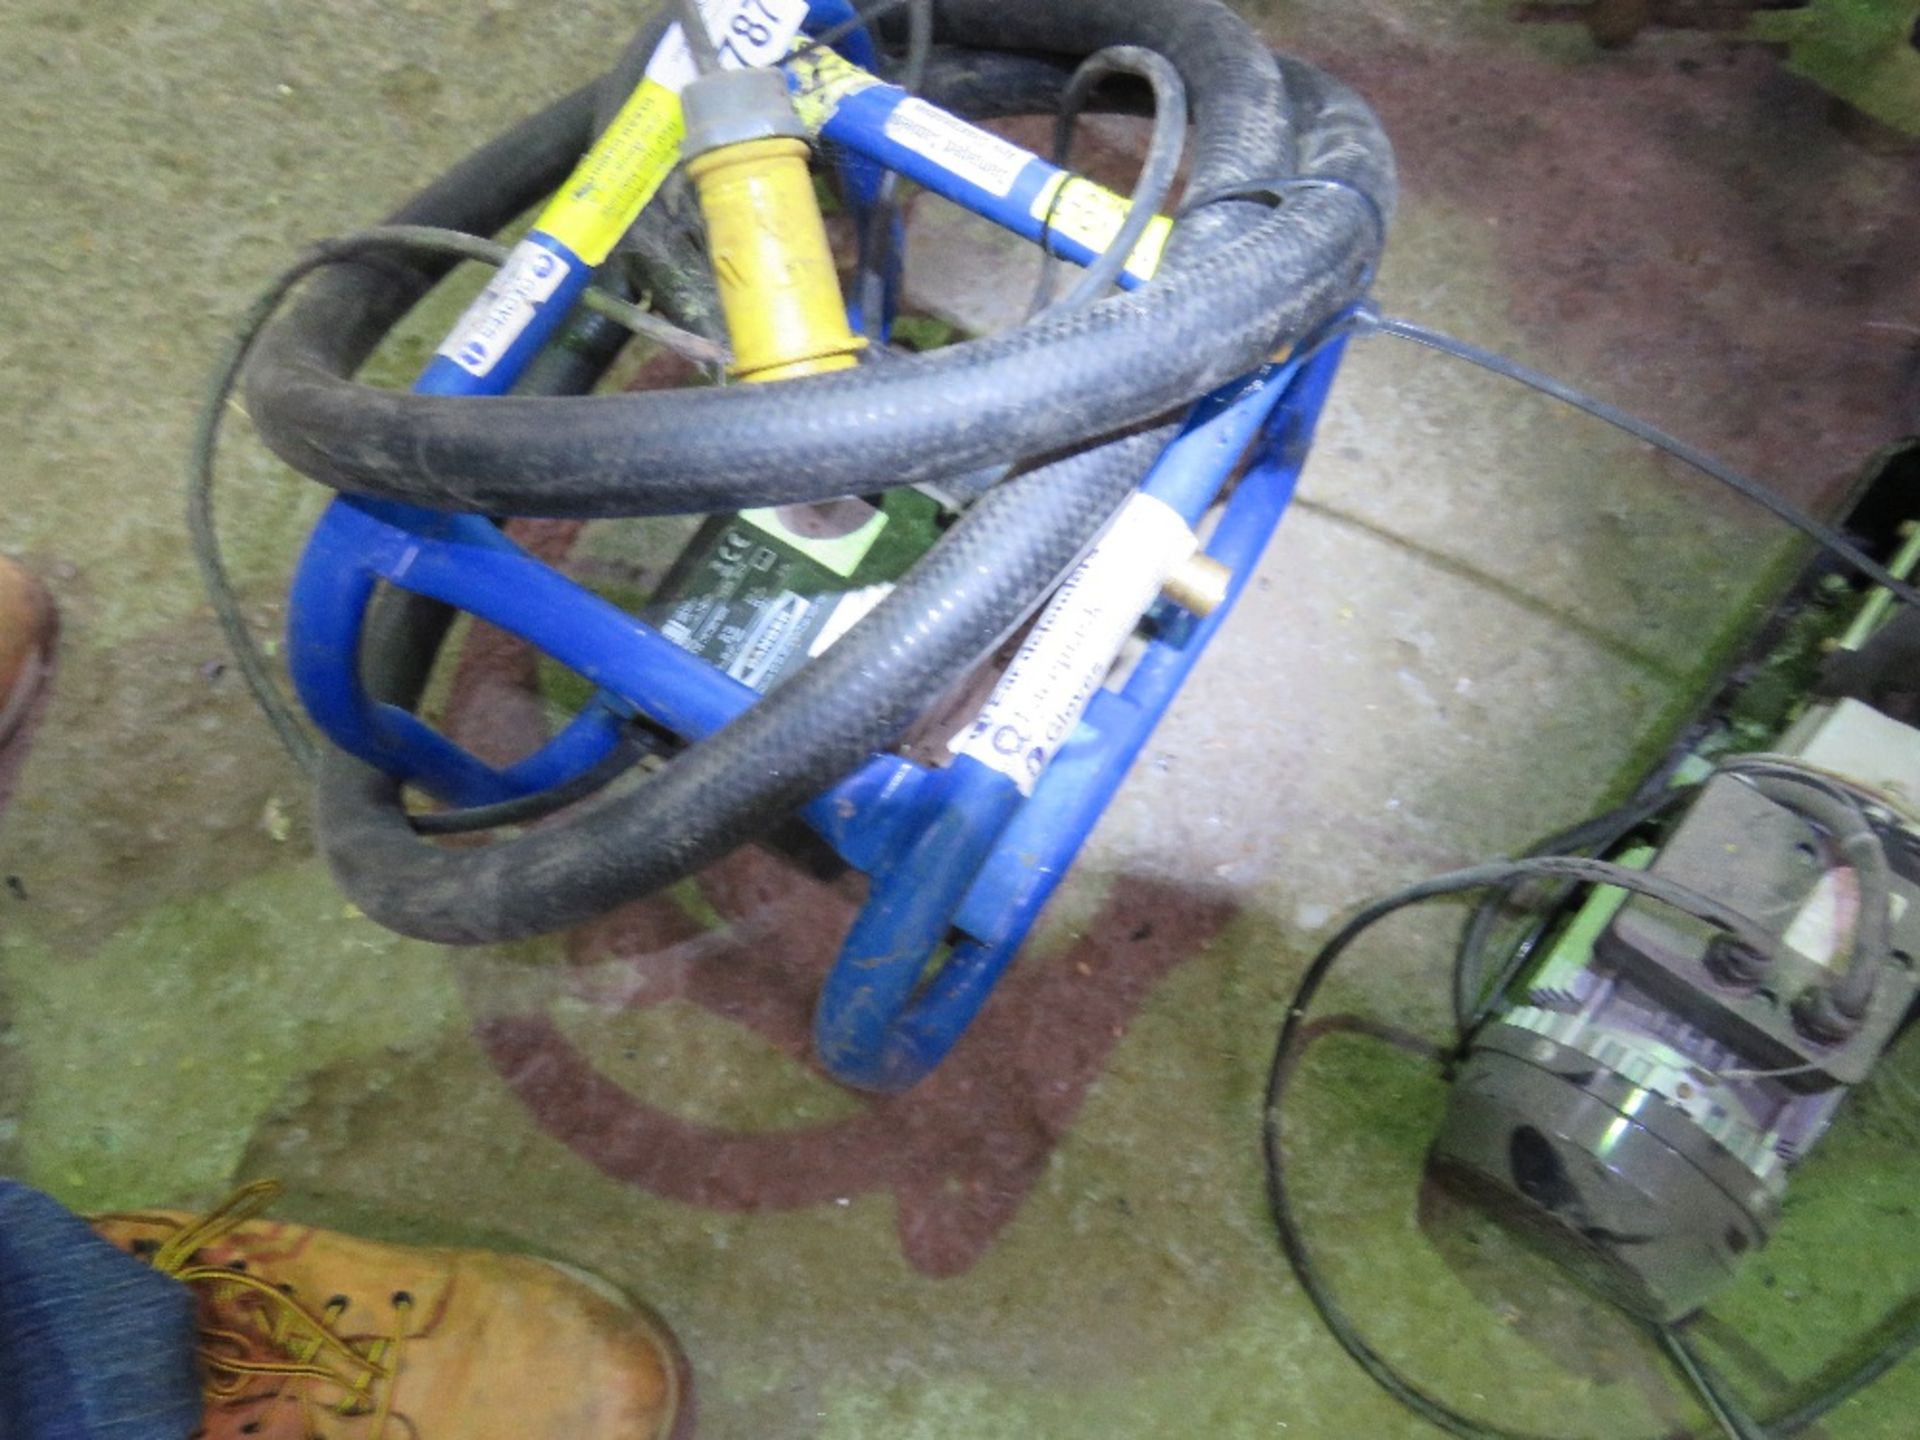 FUEL TRANSFER PUMP, 110VOLT POWERED. WITH HOSE AND GUN. - Image 3 of 4